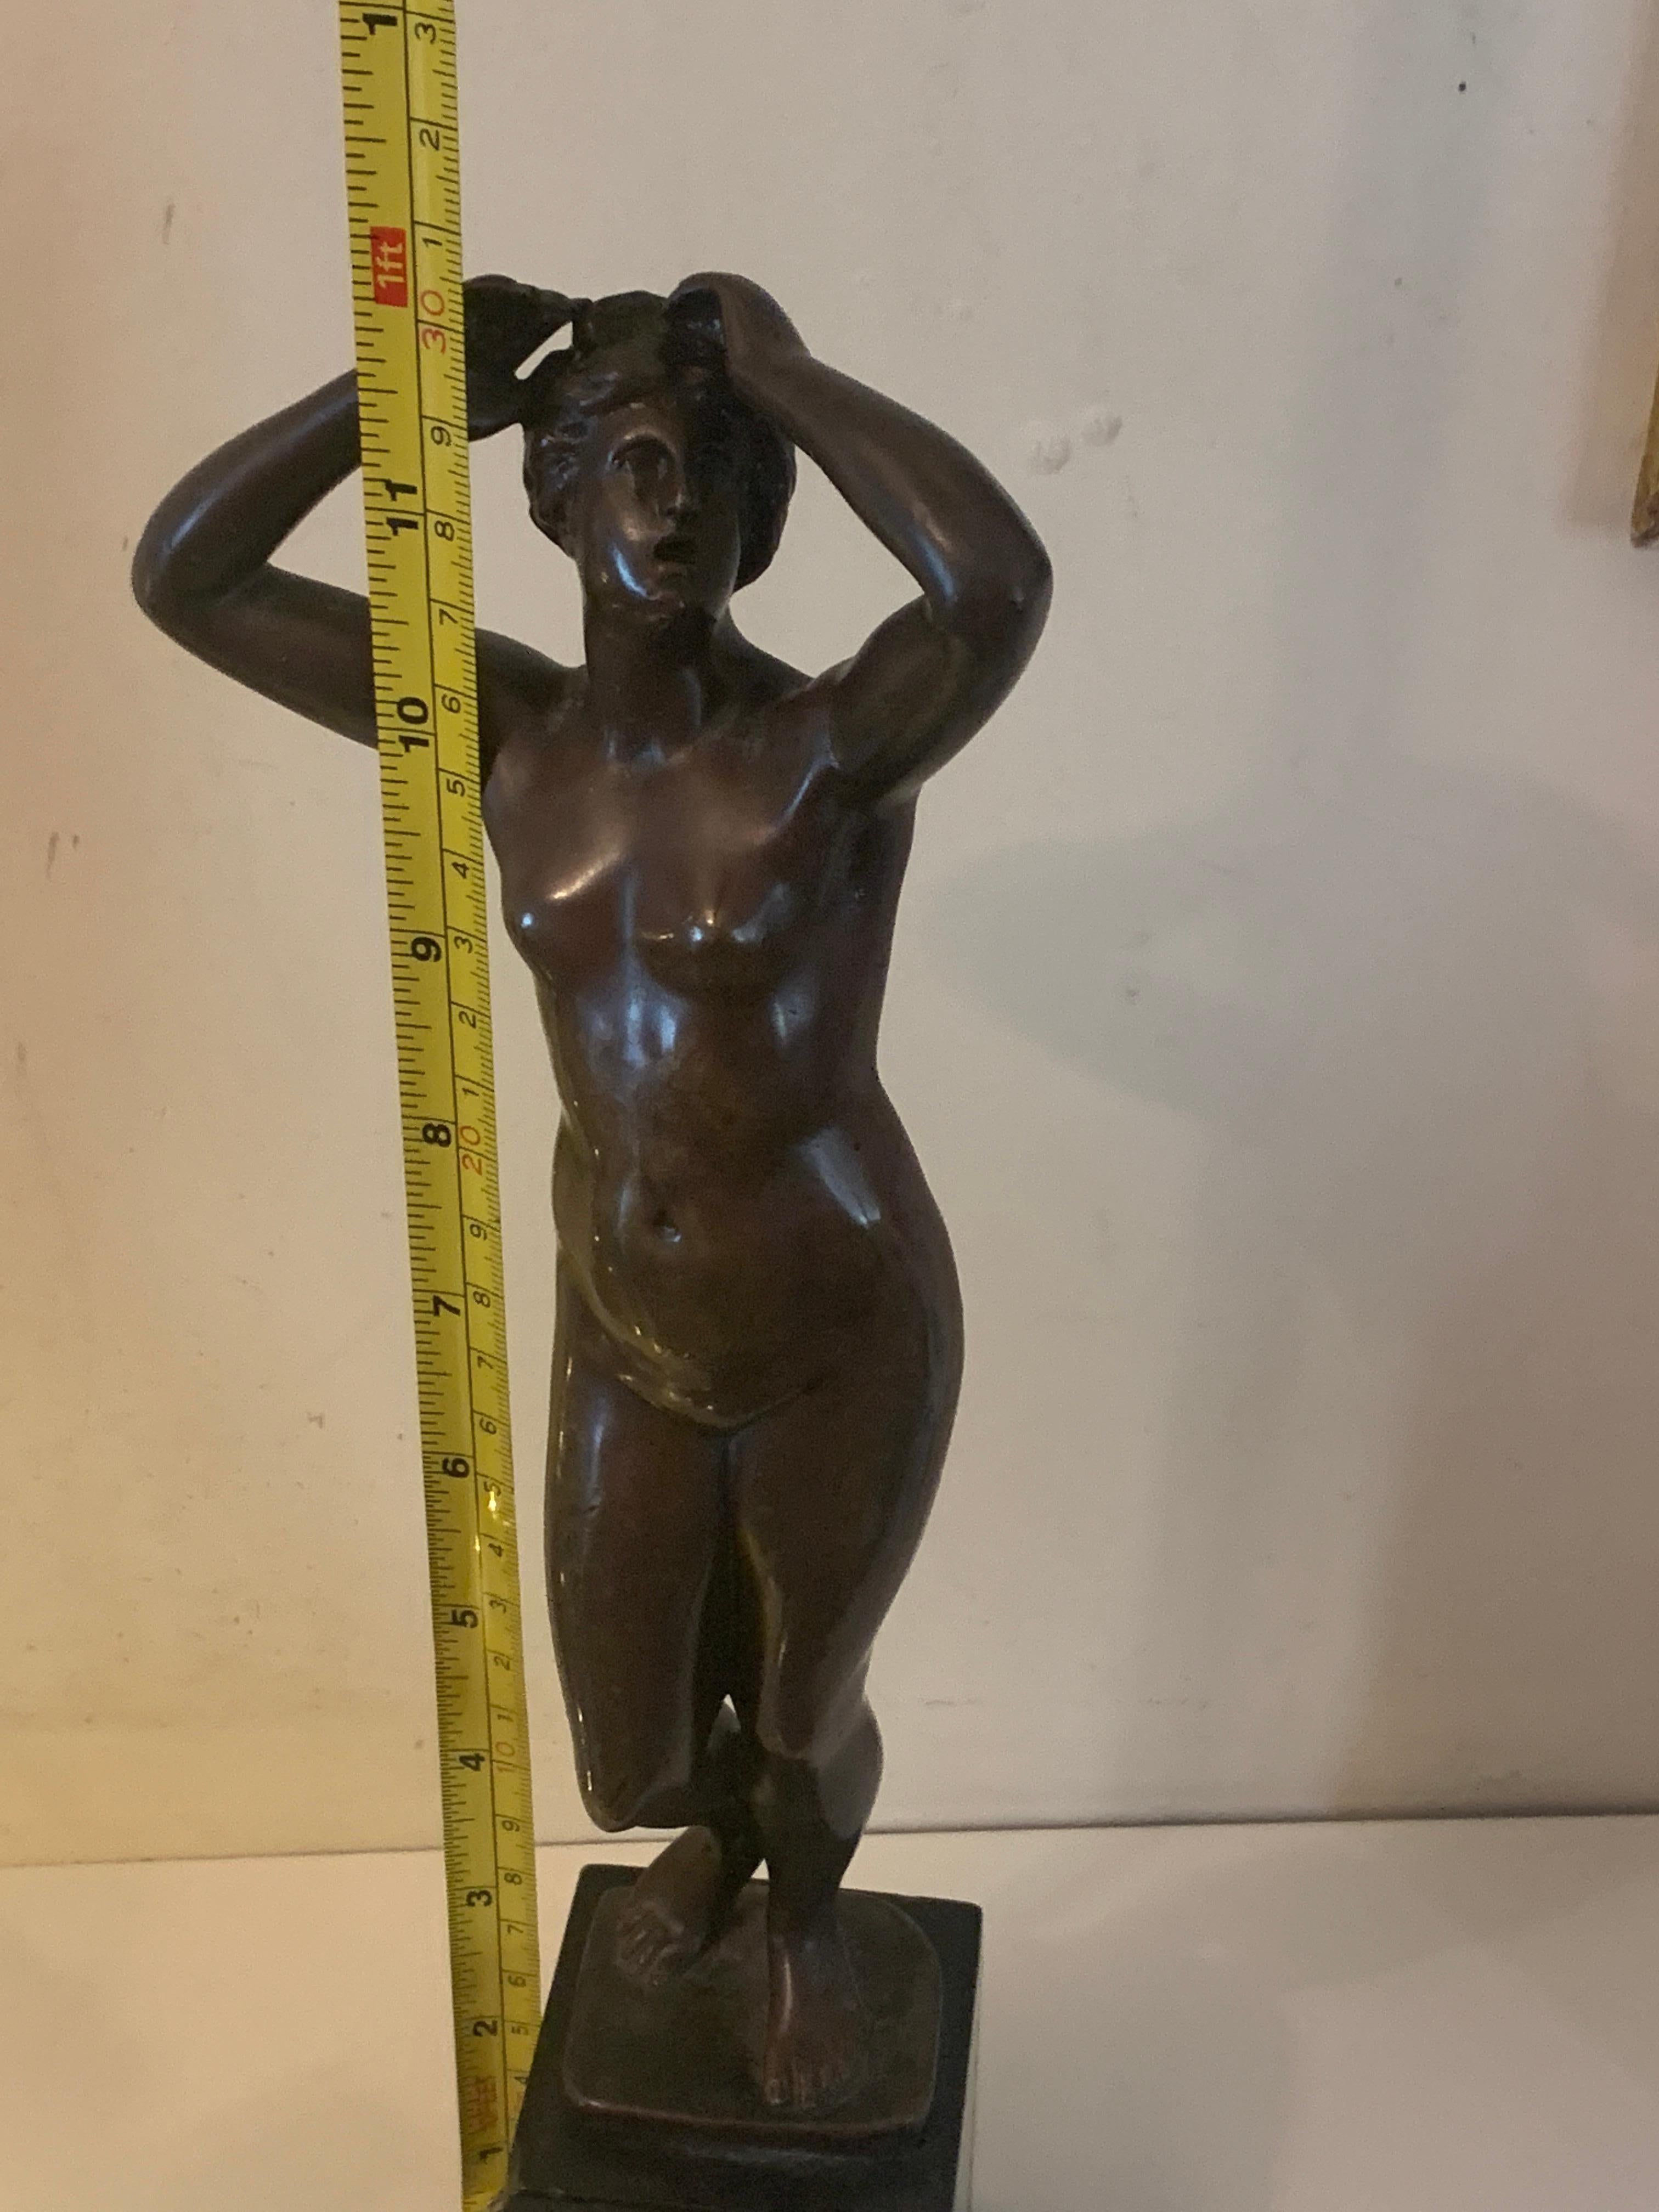 Well modeled 19th century French bronze of a standing naked woman. 

Signed Cartinet, this piece is a wonderful example of the skill of a Sculptor.

The piece retains all its original patination and it has no restoration.

The bronze sits on a black